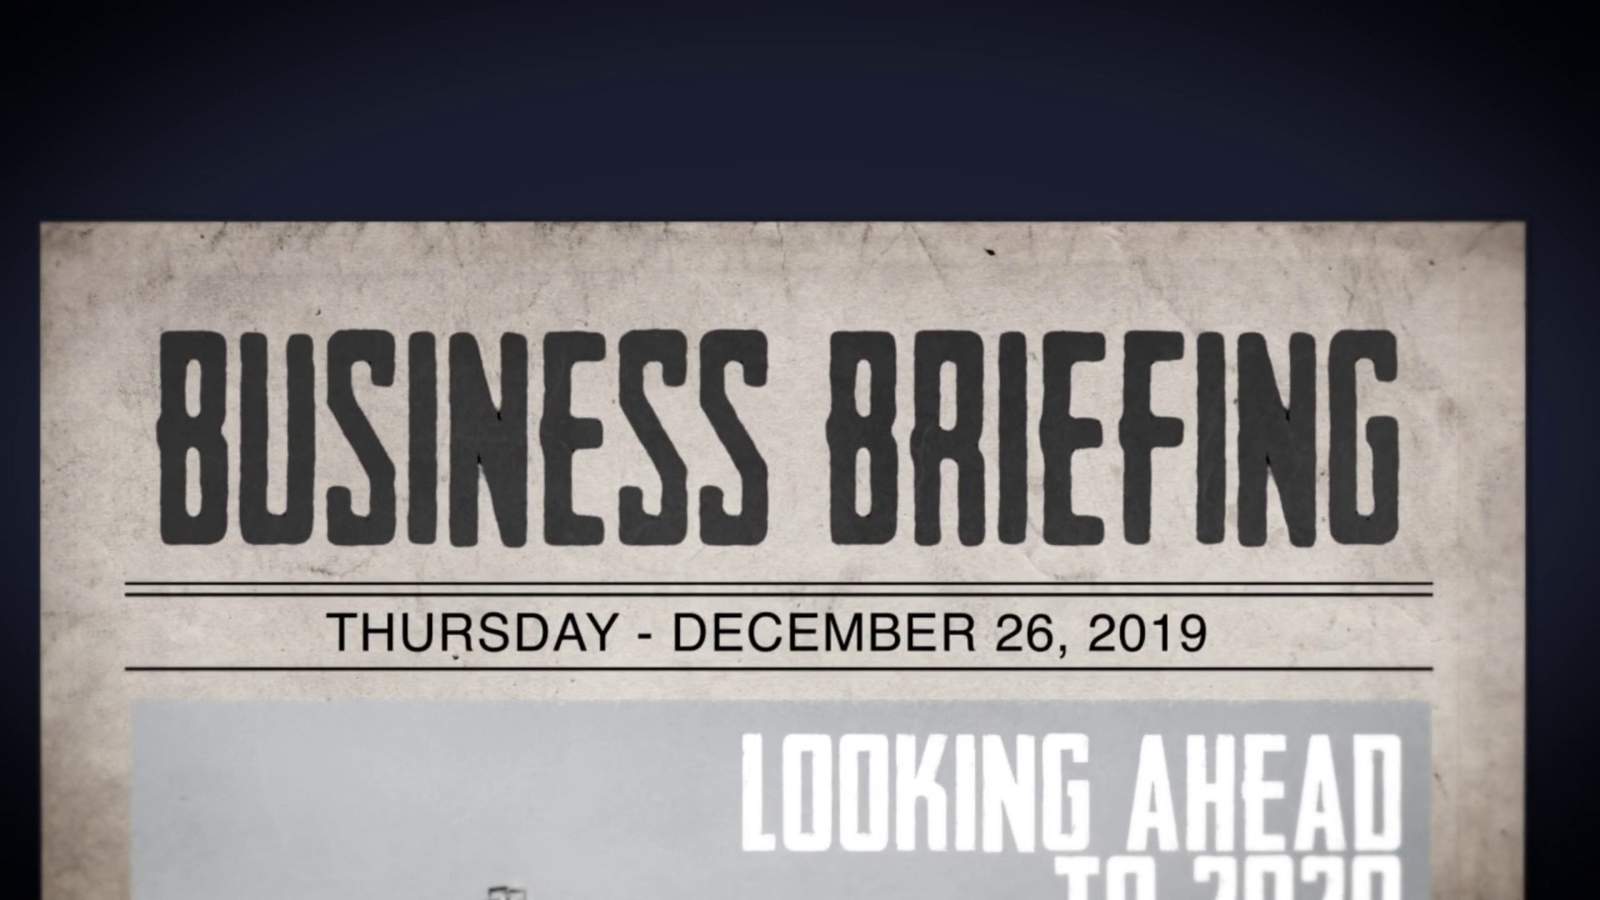 News @ 9 Business Briefing: Local job growth; Future of manufacturing; What to expect for housing market in 2020